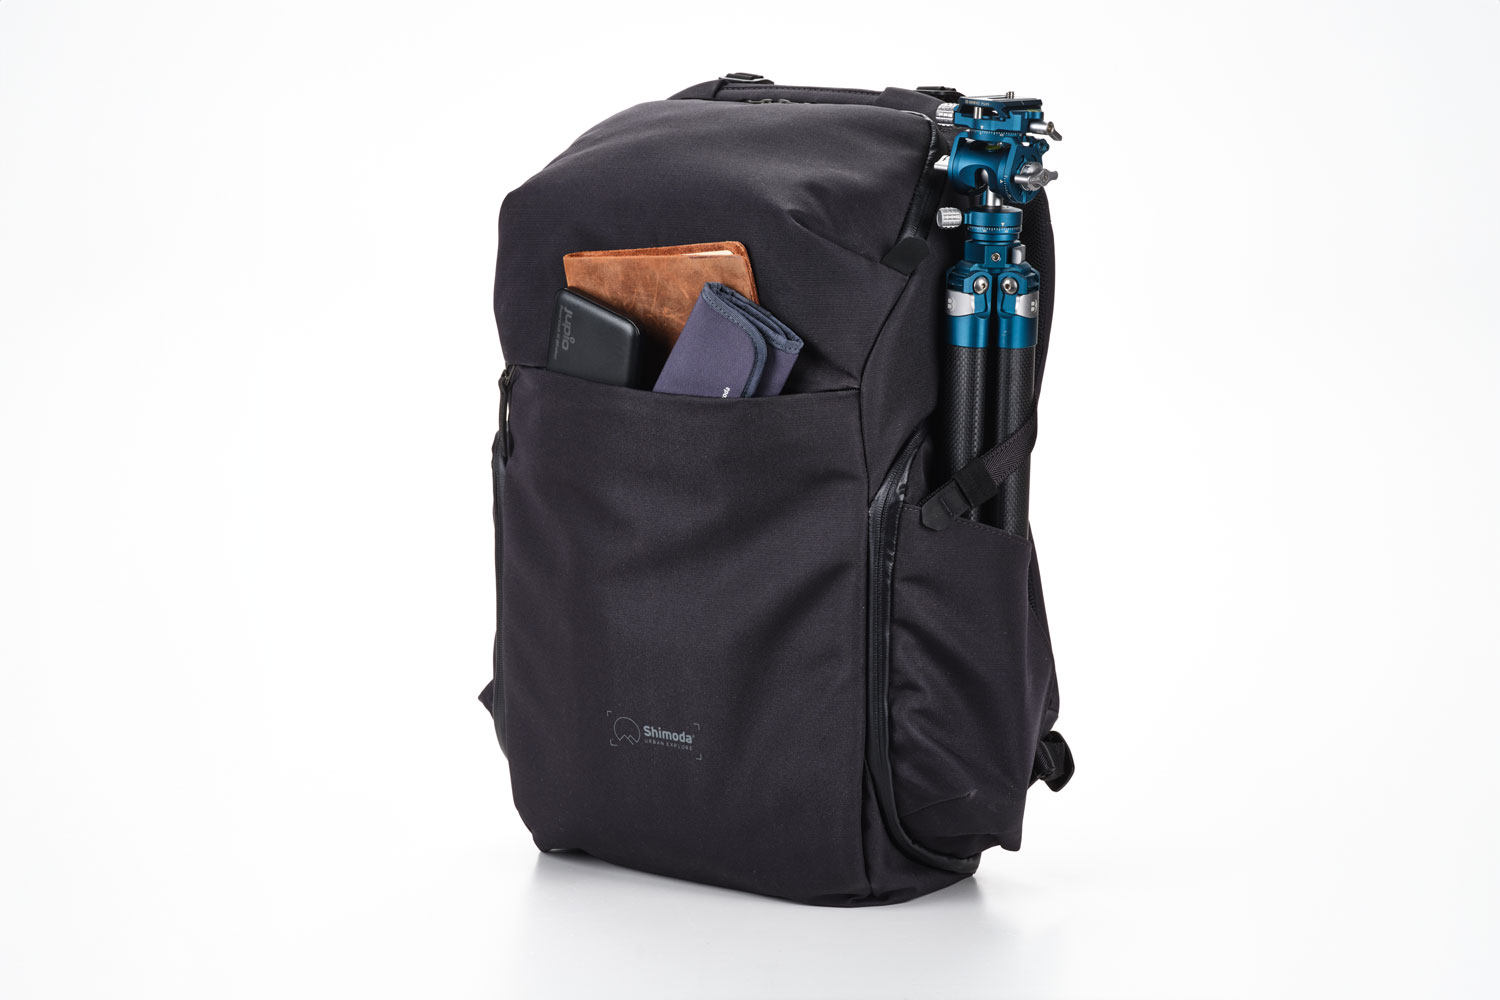 A black Shimoda Urban Explore backpack positioned upright with a tripod secured on the side and a wallet and phone protruding from an unzipped side pocket, set against a white background.